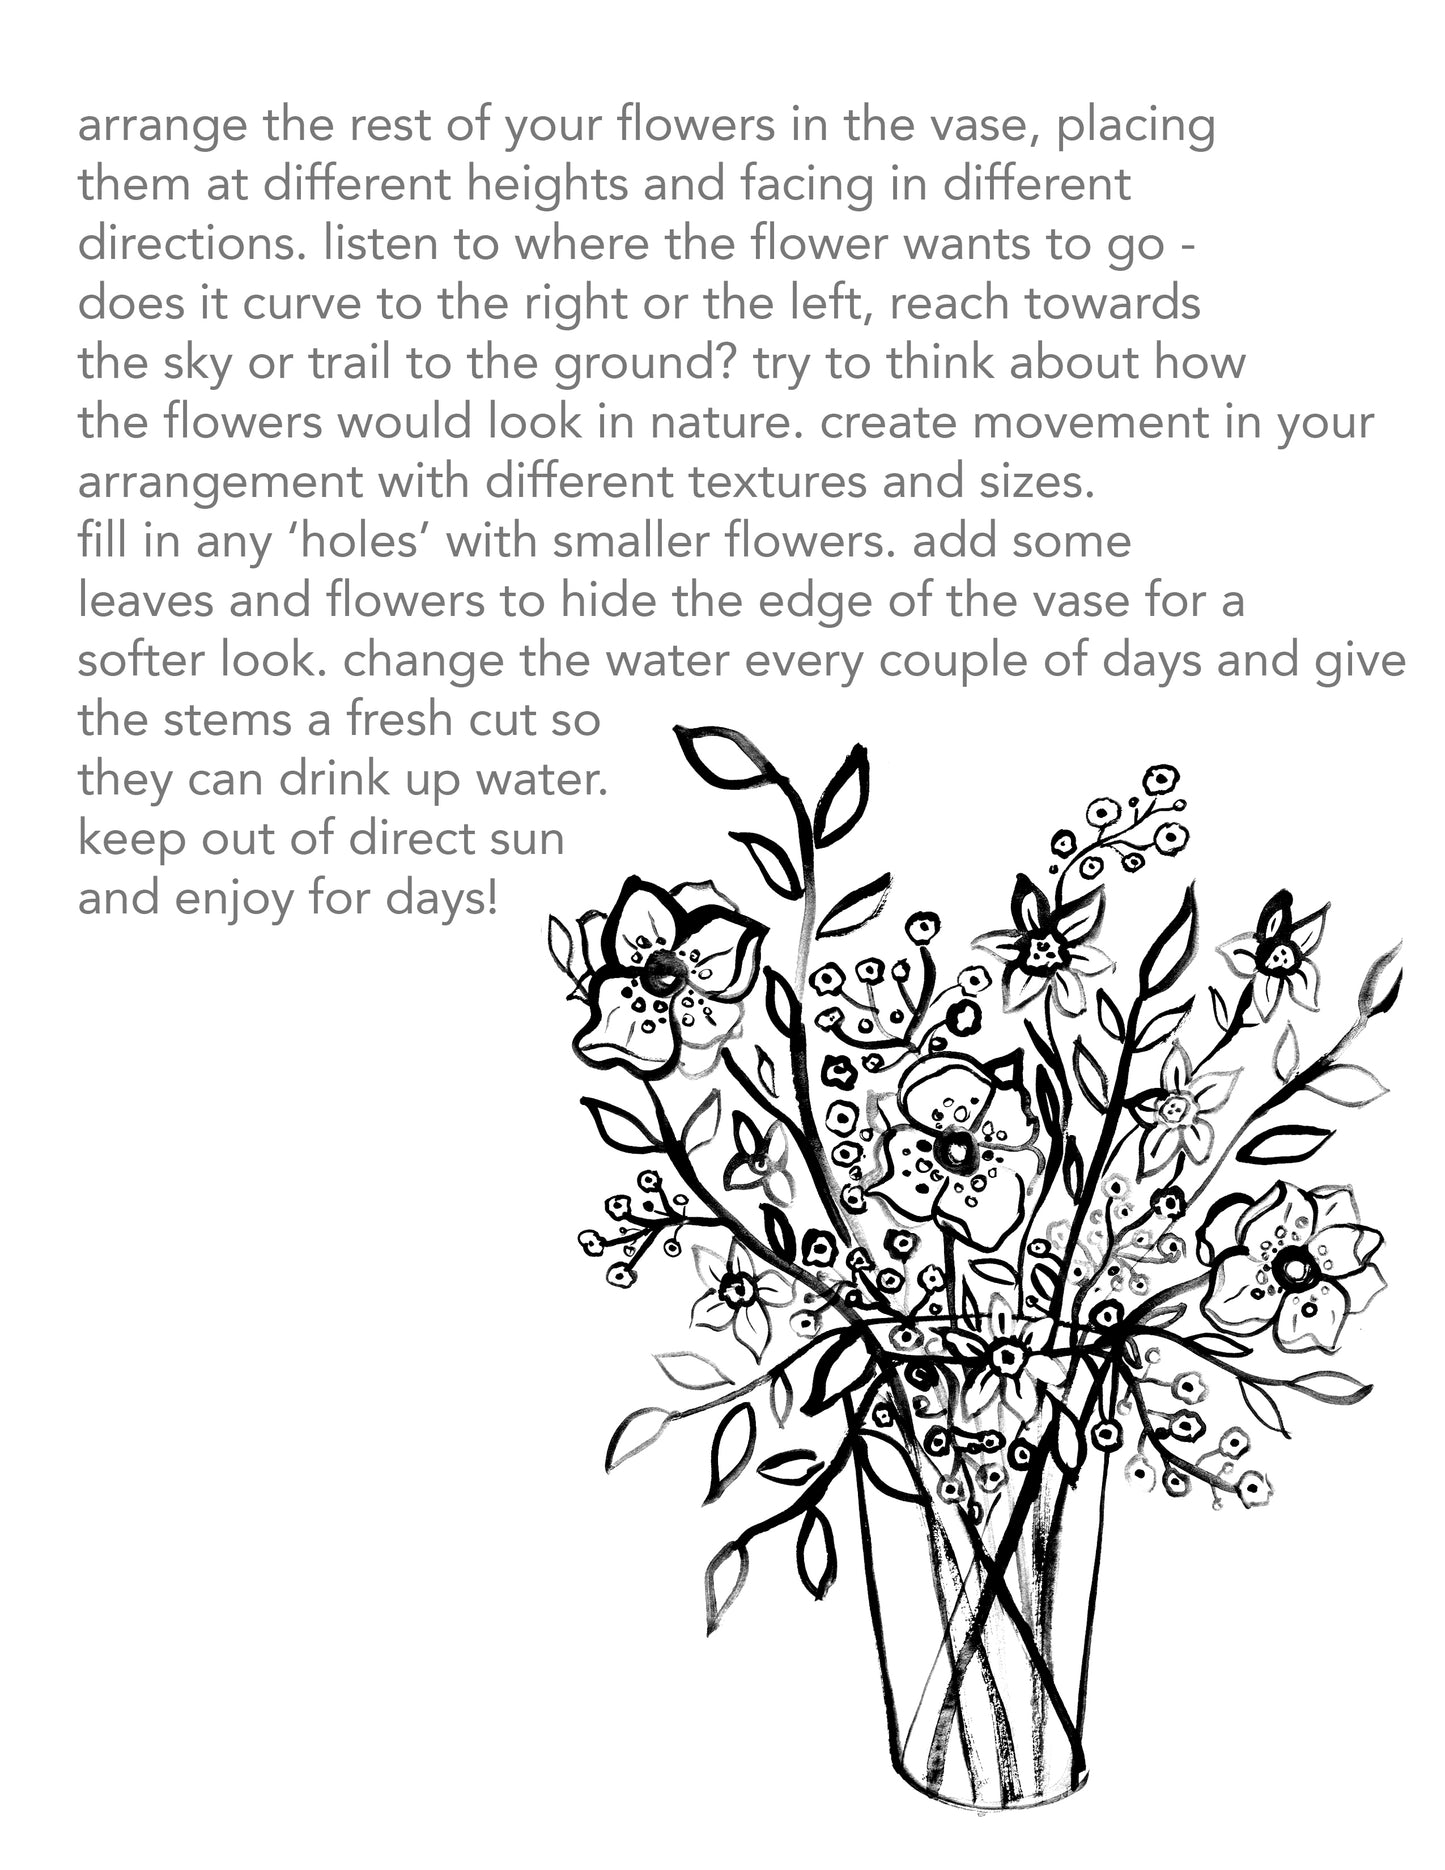 Floral Arranging Kit for Bridal & Baby Showers or Parties.